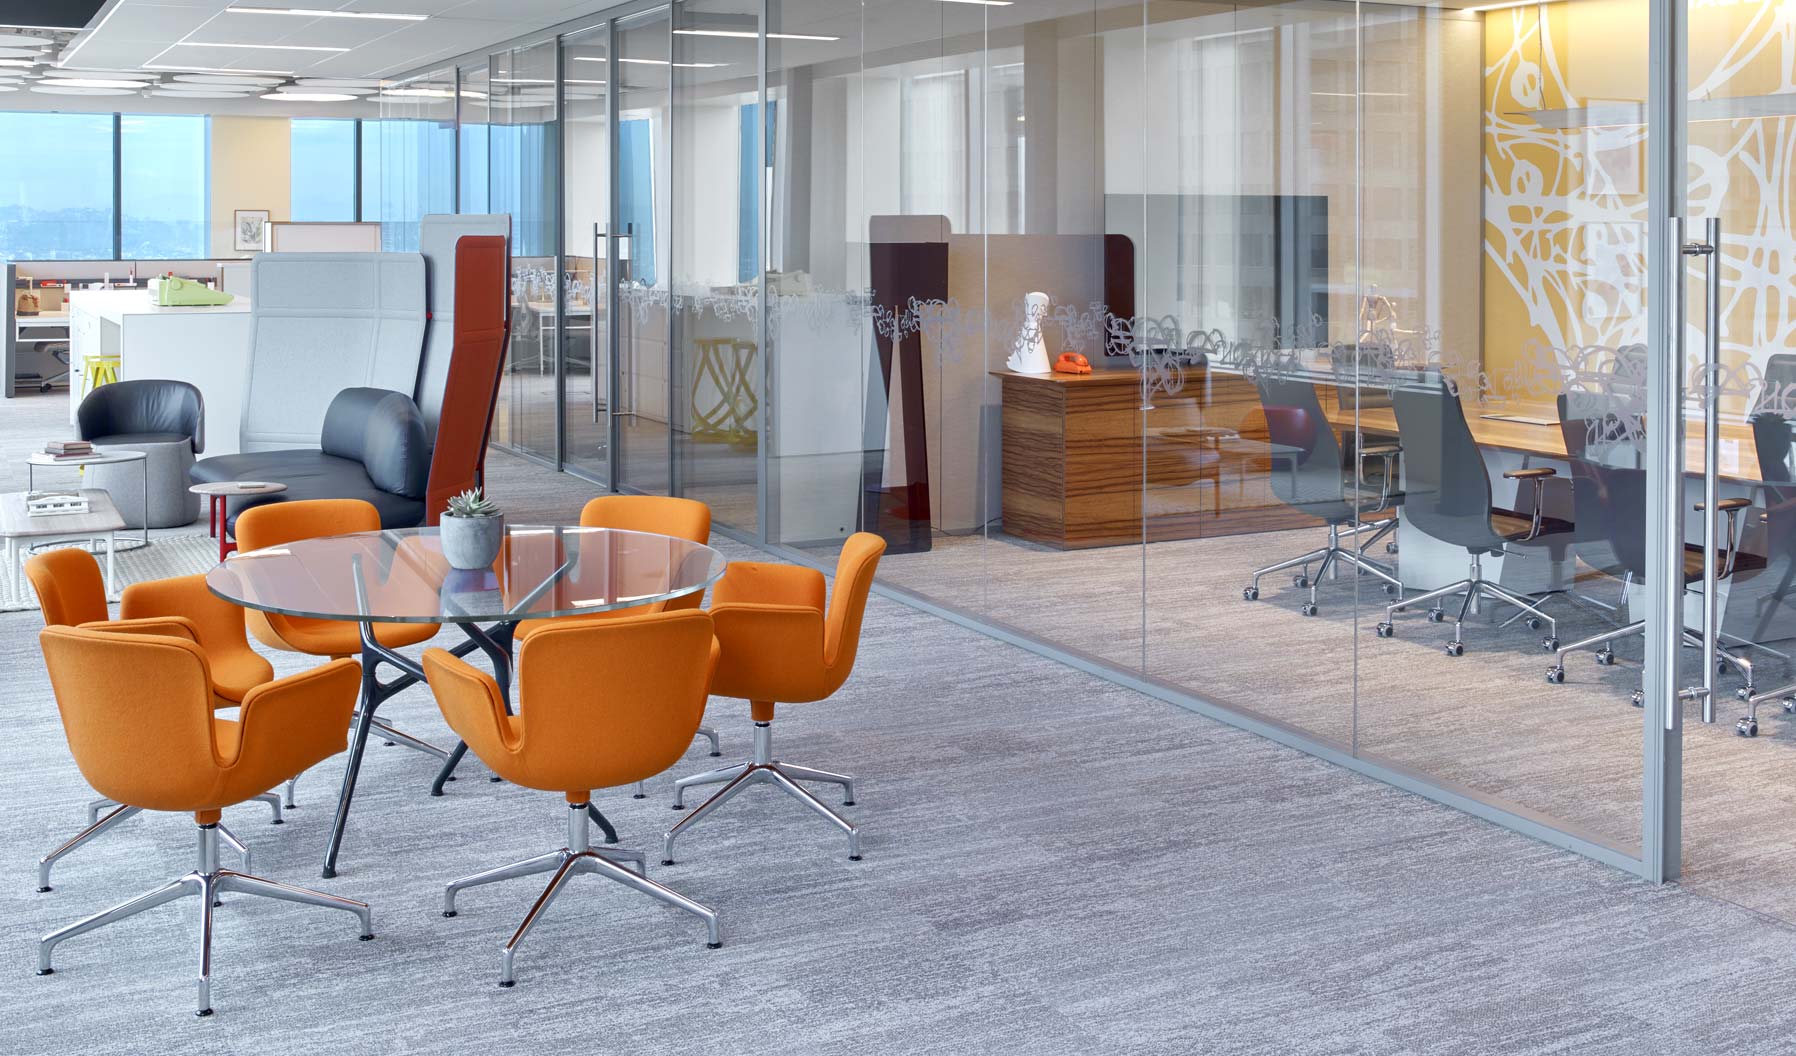 This area demonstrates how both traditional and informal meeting areas can be paired to support various types of collaboration. The use of glass, the ceiling plane, and shared views to the outside help these spaces feel connected.